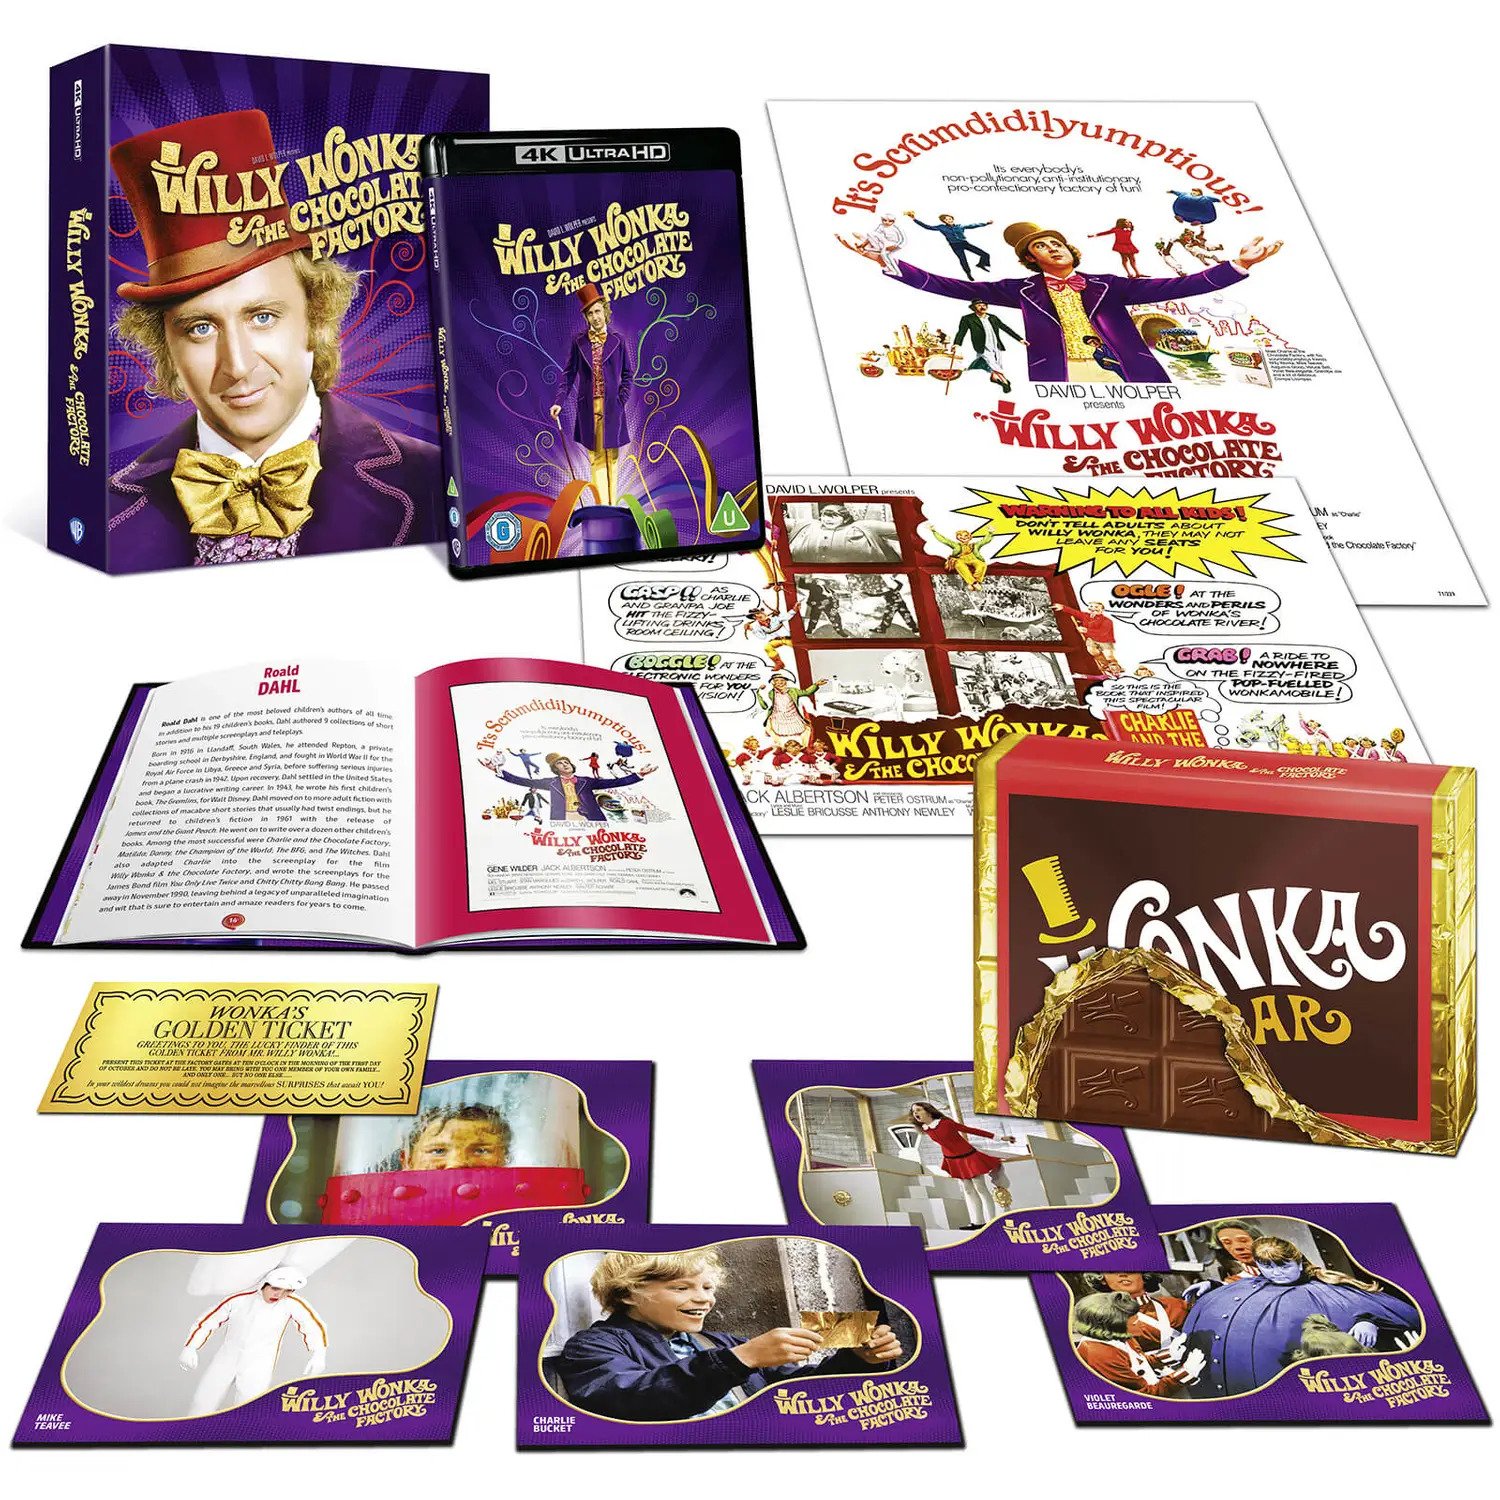 Willy Wonka Collector'S edition.jpg